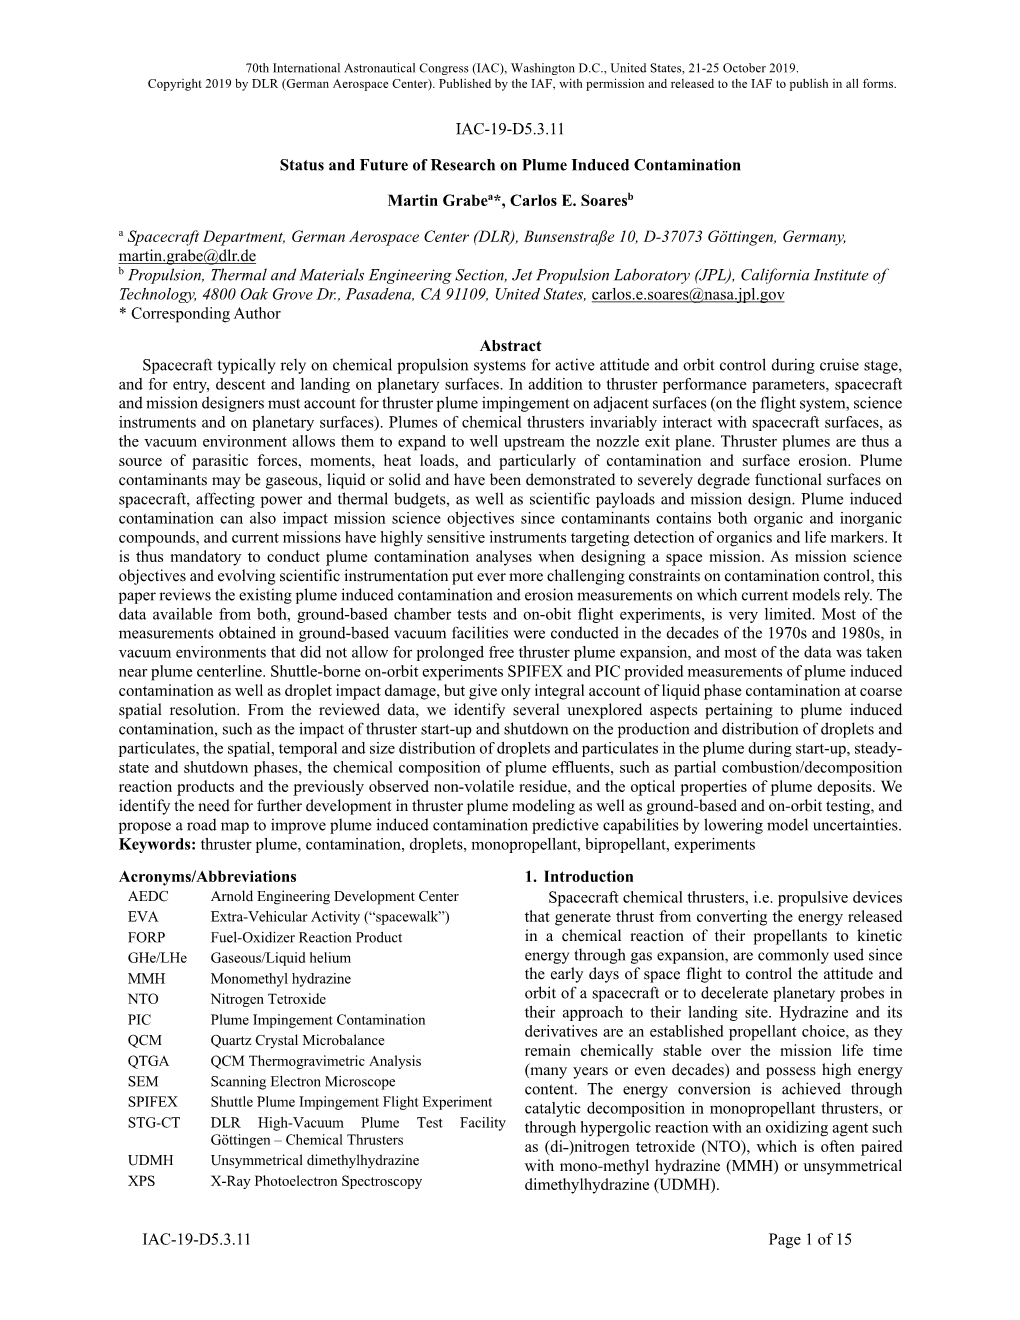 IAC-19-D5.3.11 Page 1 of 15 IAC-19-D5.3.11 Status and Future of Research on Plume Induced Contamination Martin Grabea*, Carl